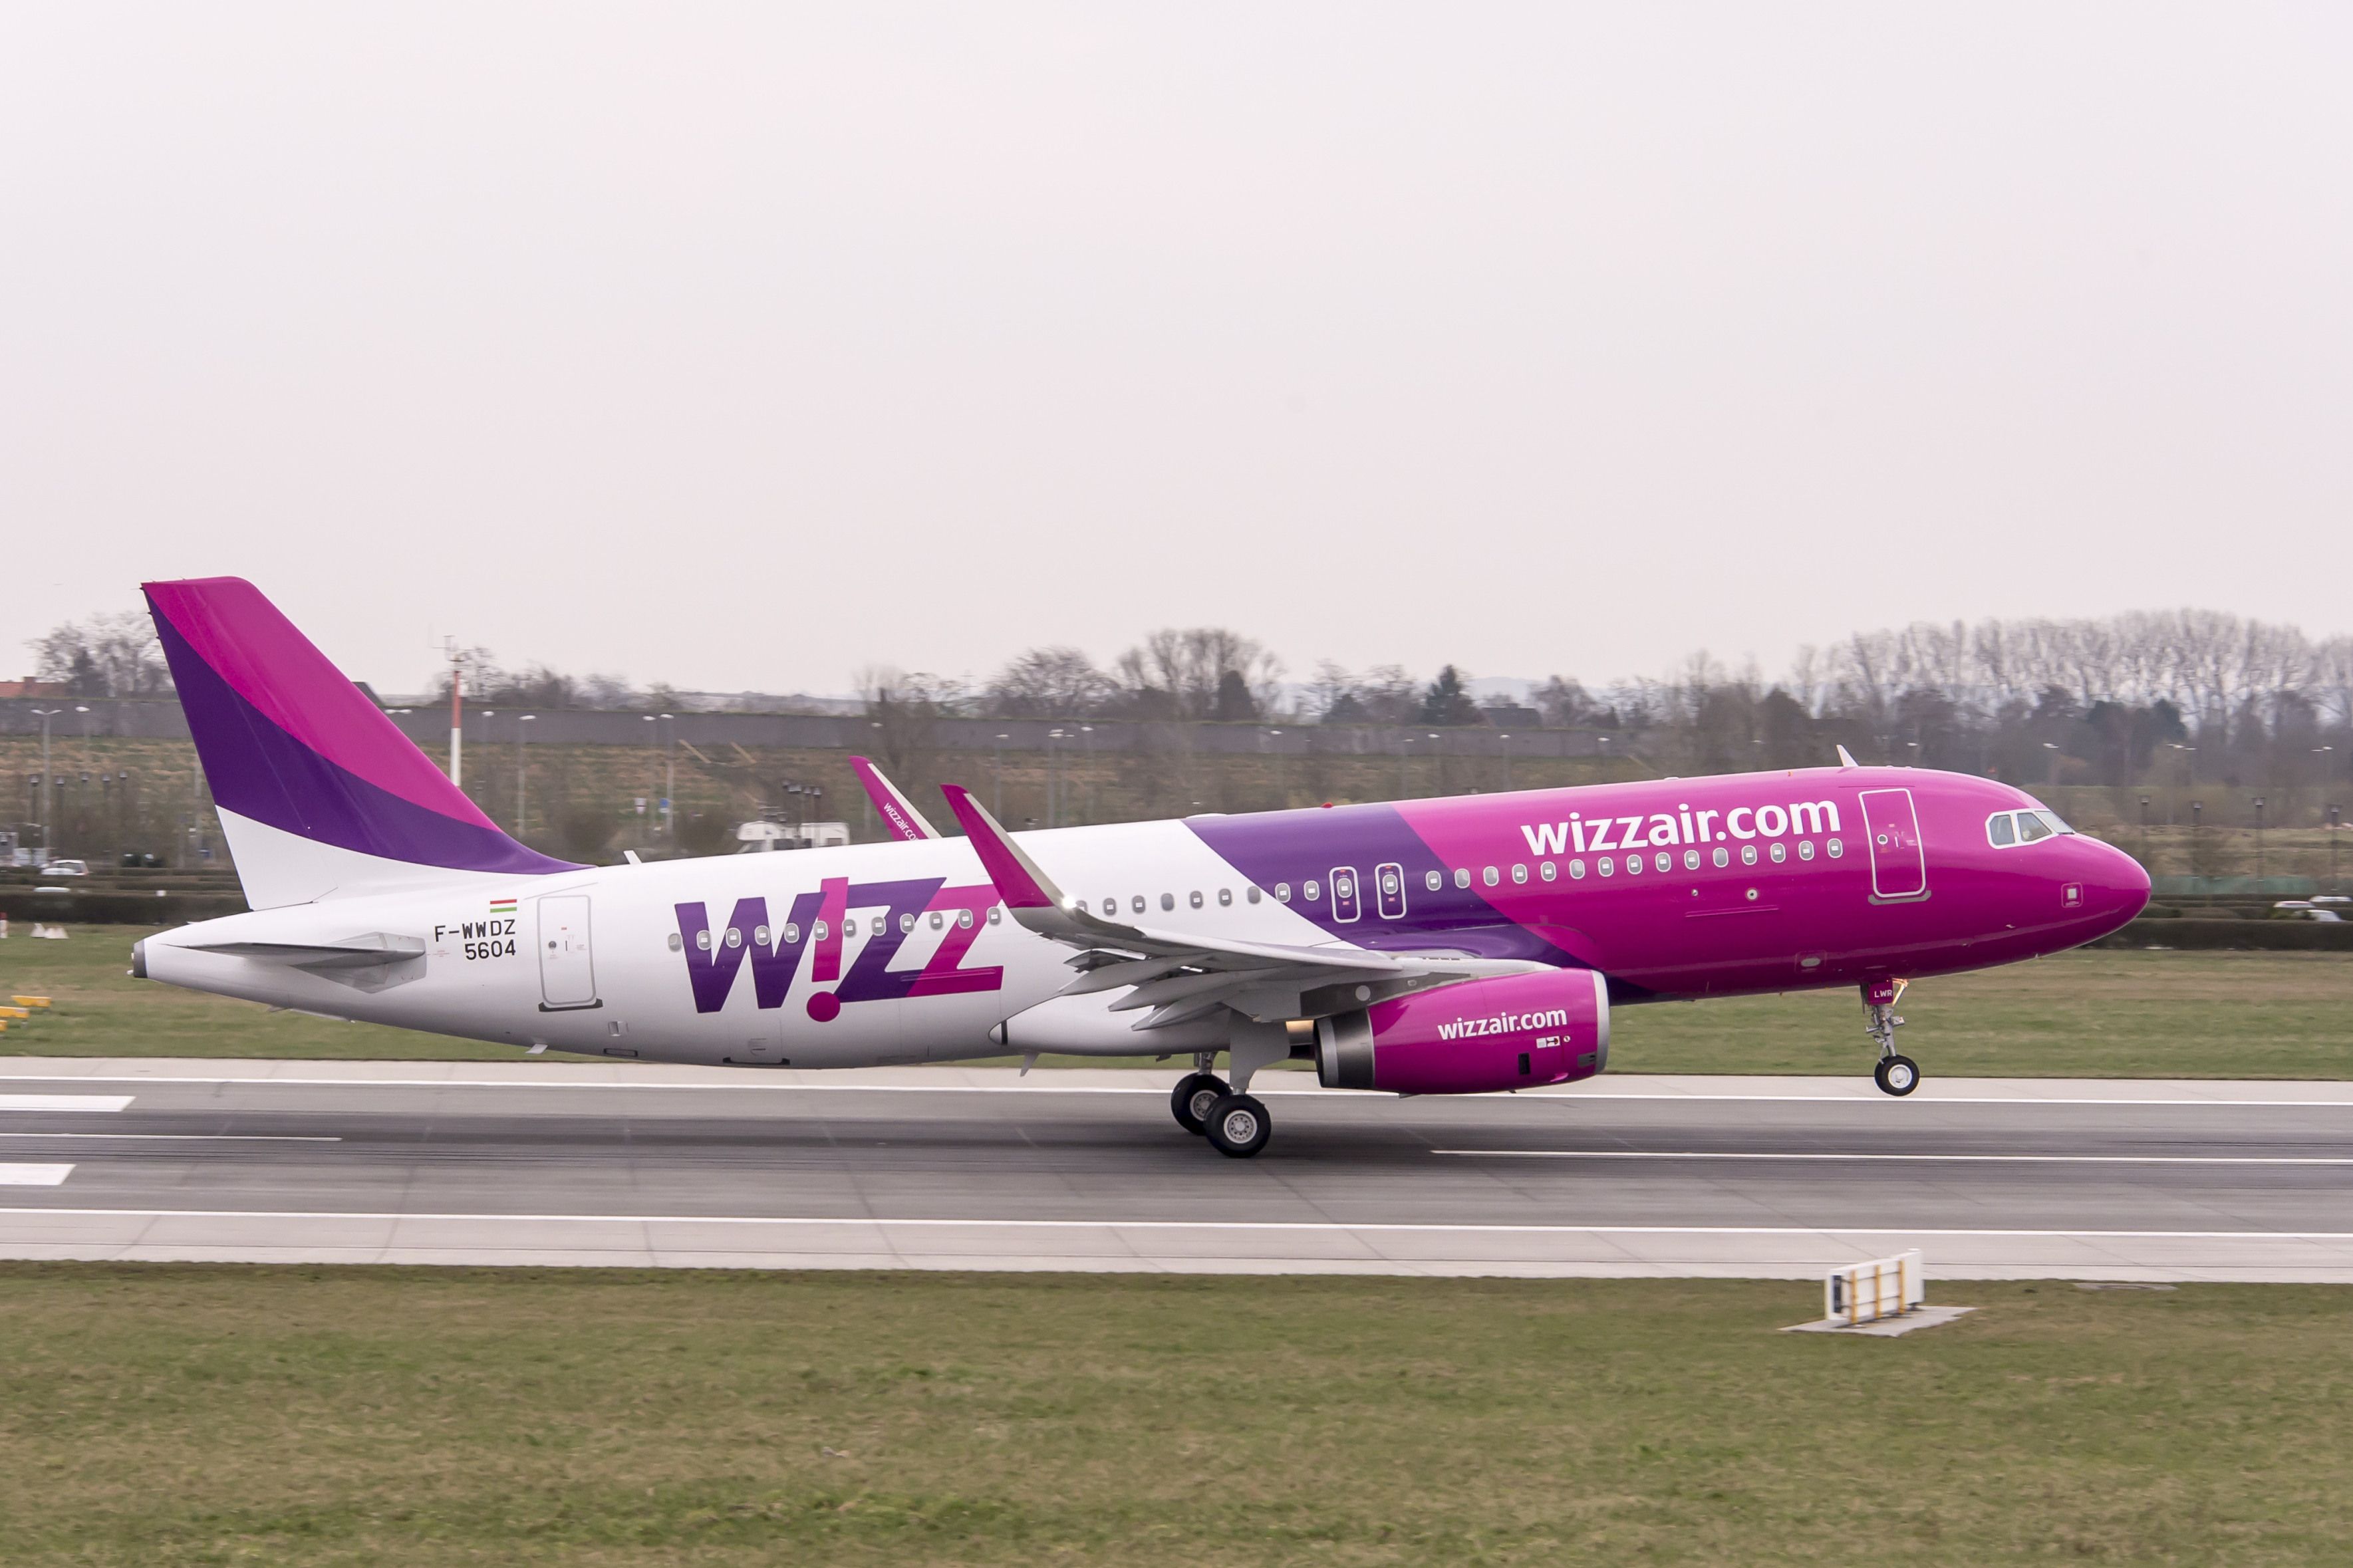 A Wizz Air Airbus A320 taking off.